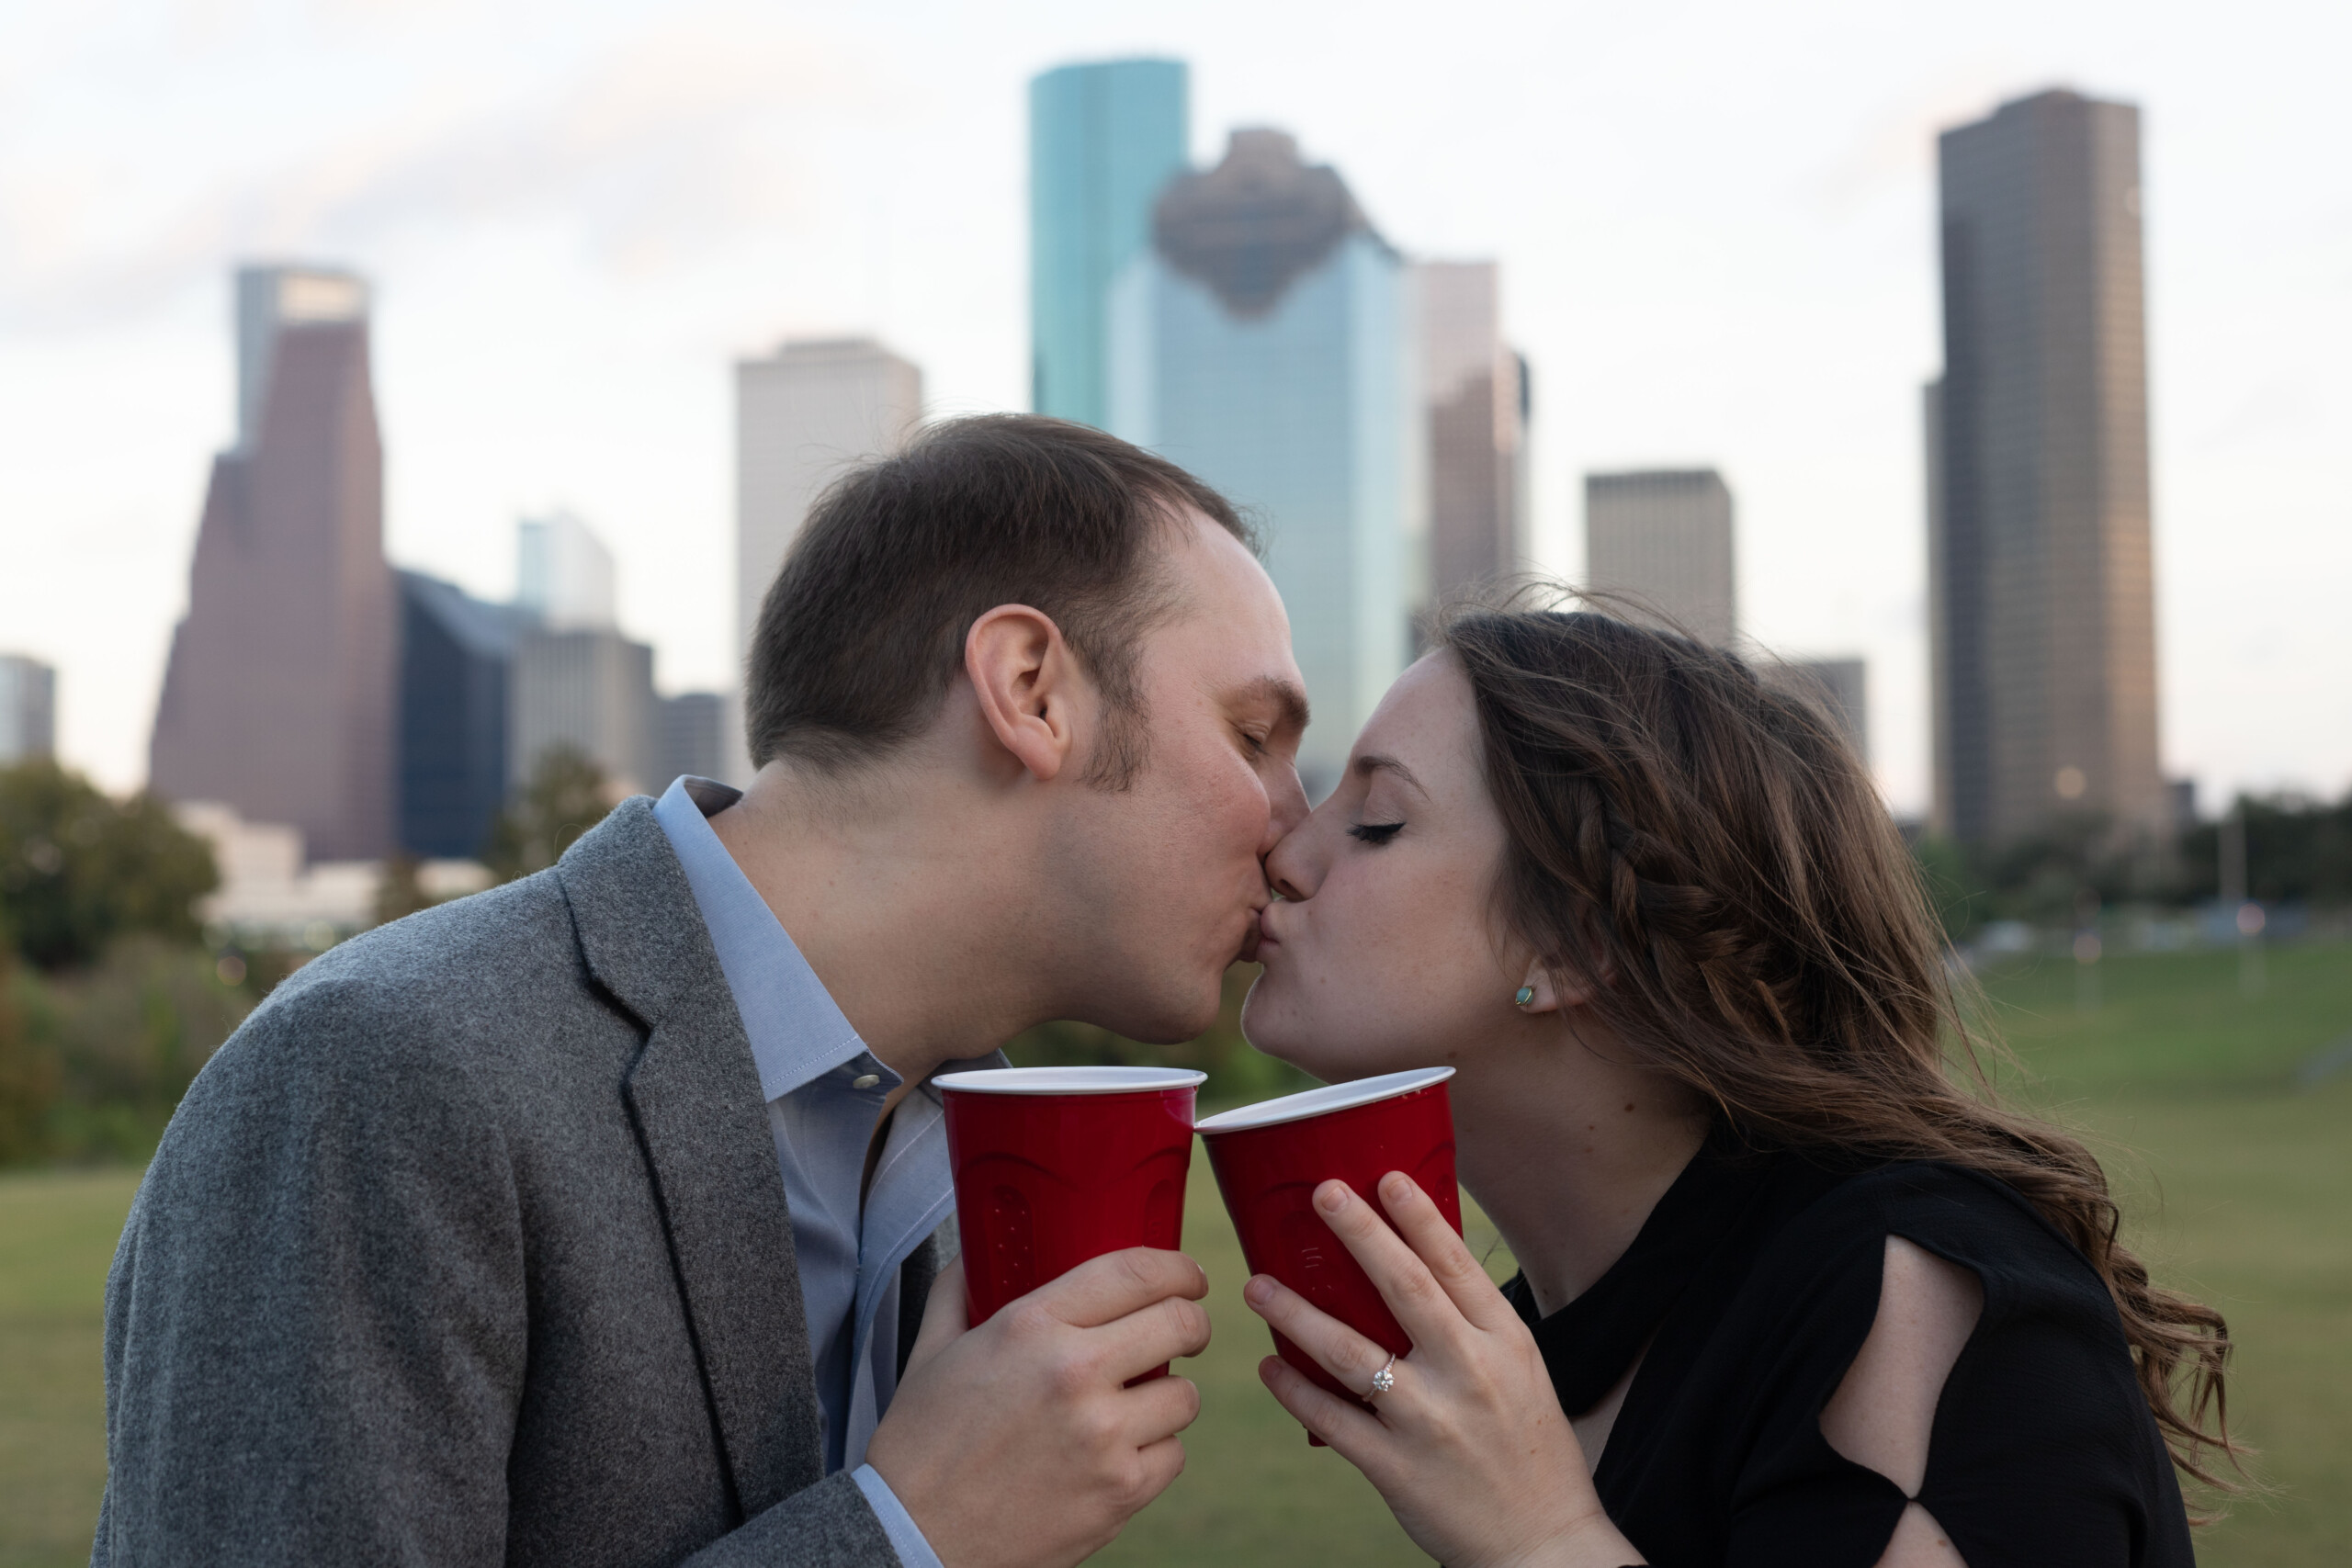 Proposal photoshoot by Jab, Localgrapher in Houston